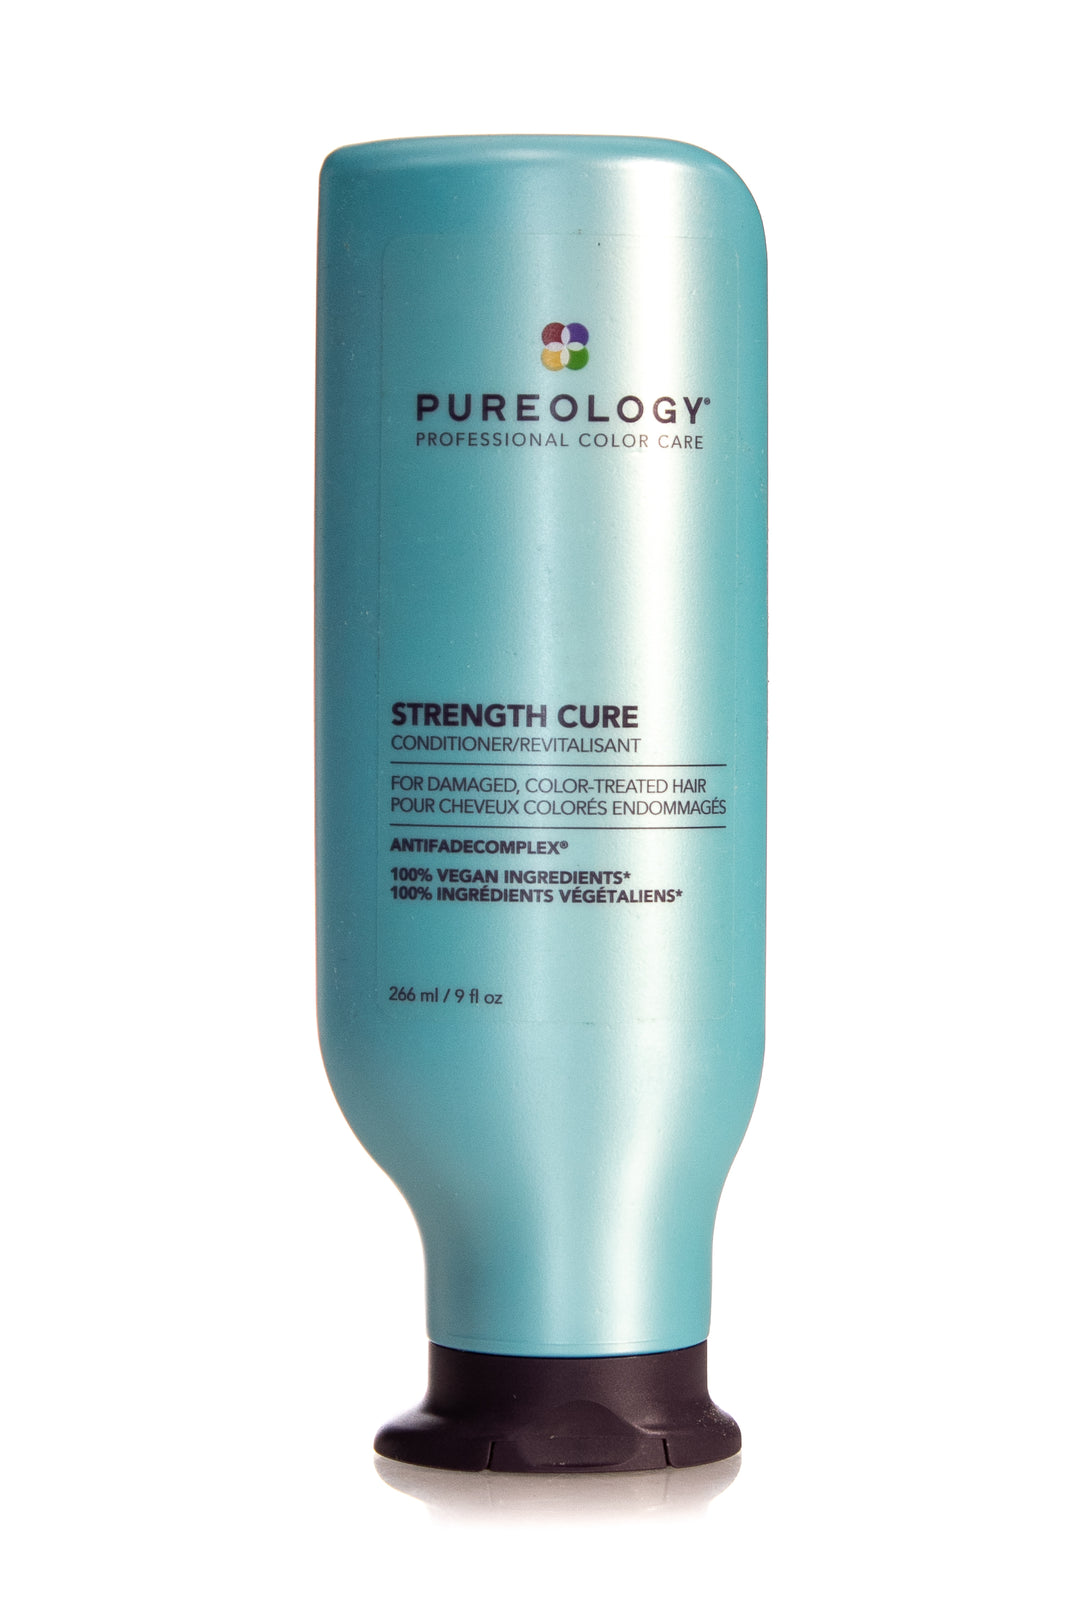 PUREOLOGY Strength Cure Conditioner | 266ml